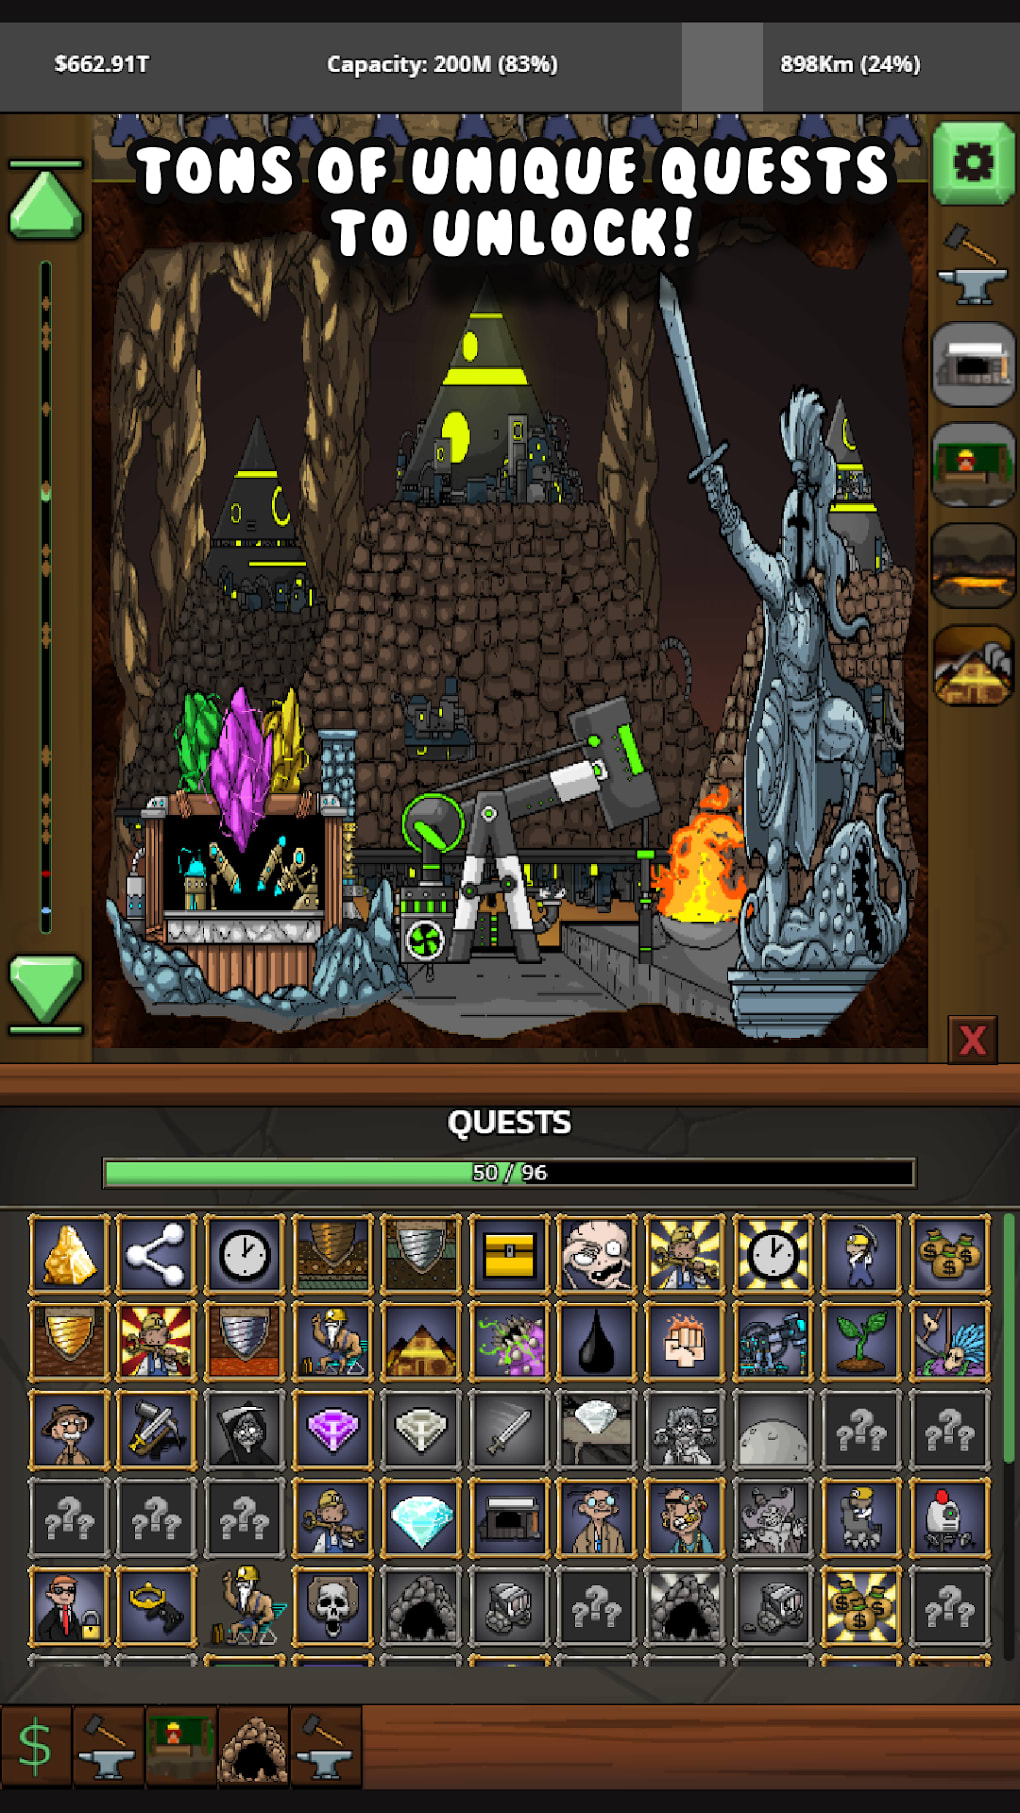 mining clicker game Archives - MrMine Blog